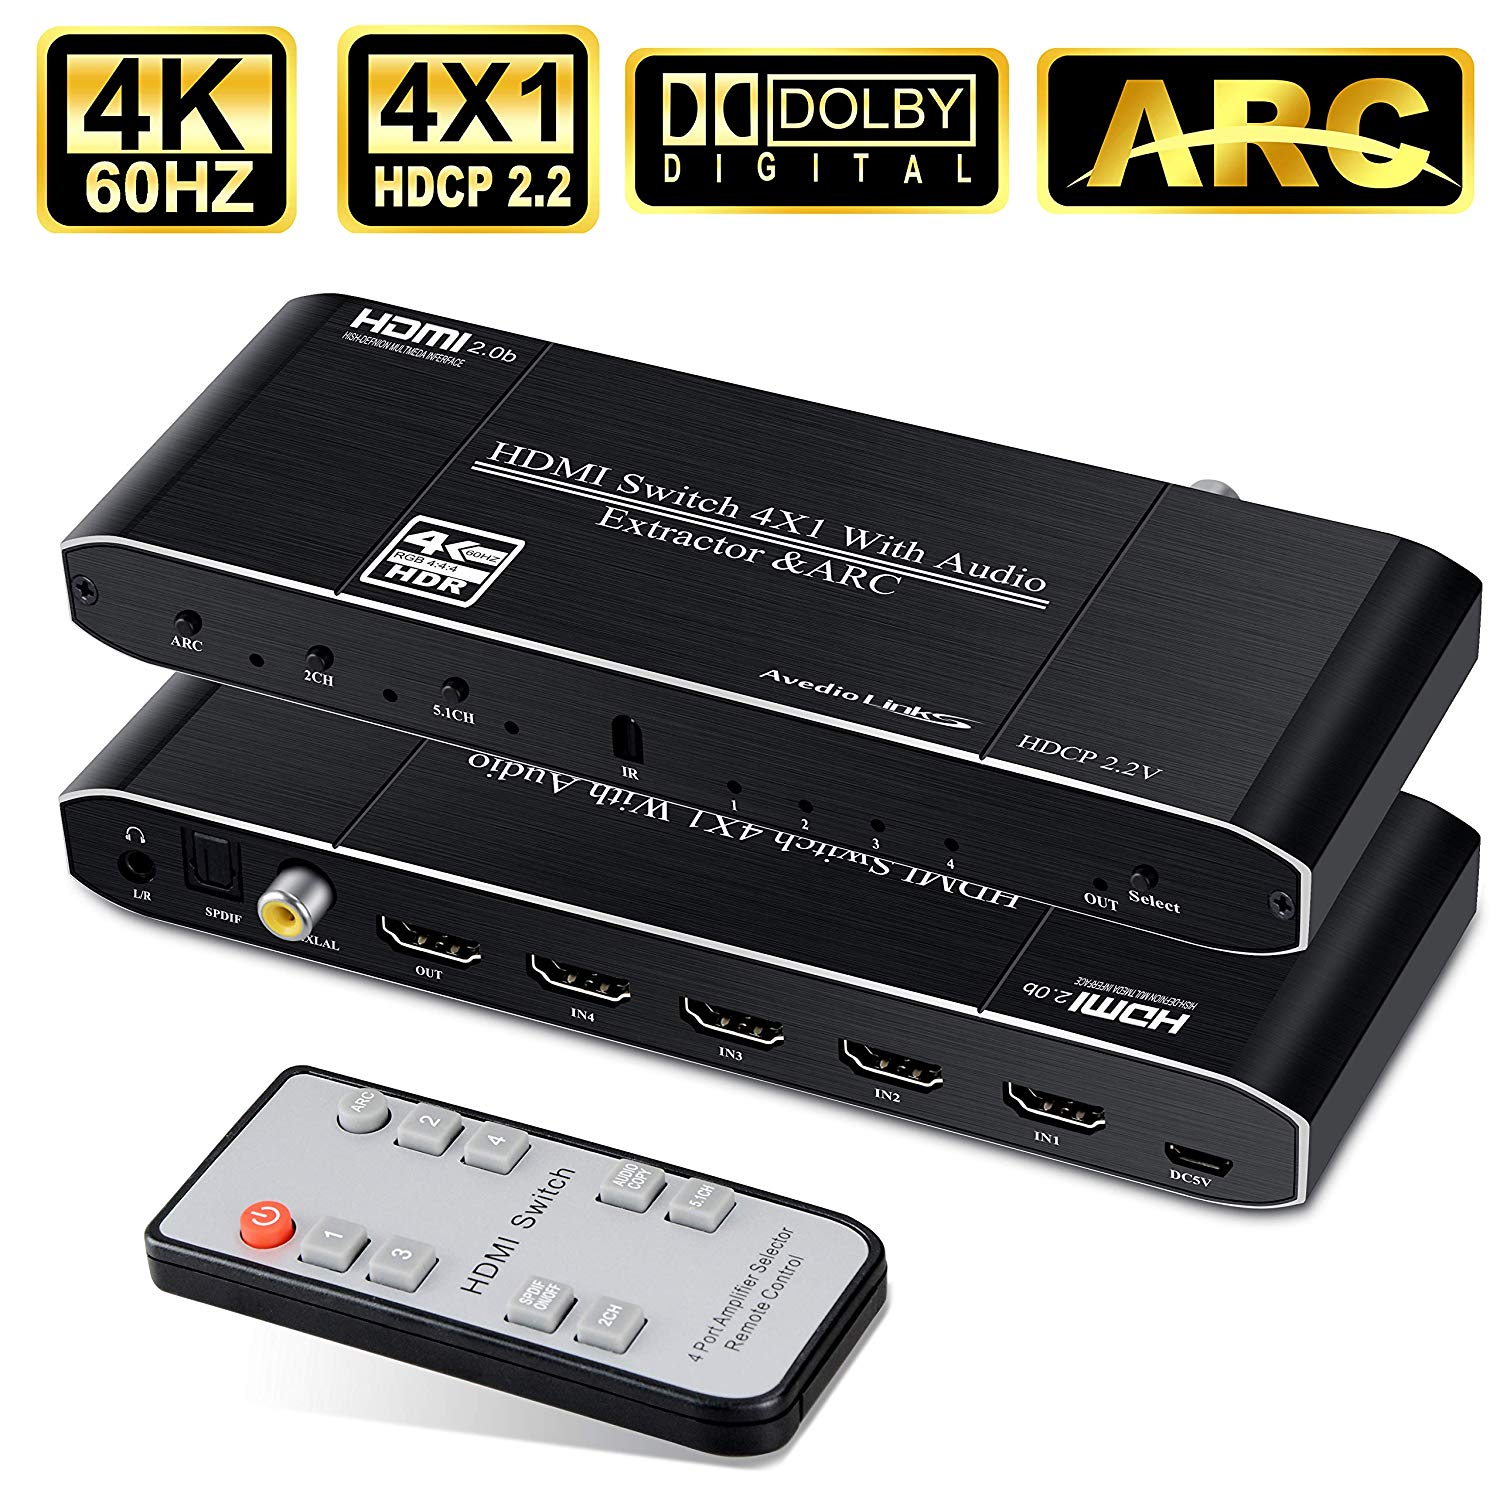 Scaler 4K 1080P Synch 3.5mm Stereo Audio AV Access HDMI Matrix 4x2 4K@60Hz 4:4:4 HDR Dolby Vision ARC CEC SPDIF 5.1CH HDCP 2.2 HDMI 2.0 Matrix 18Gbps with IR Remote API RS232 4 in 2 Out 